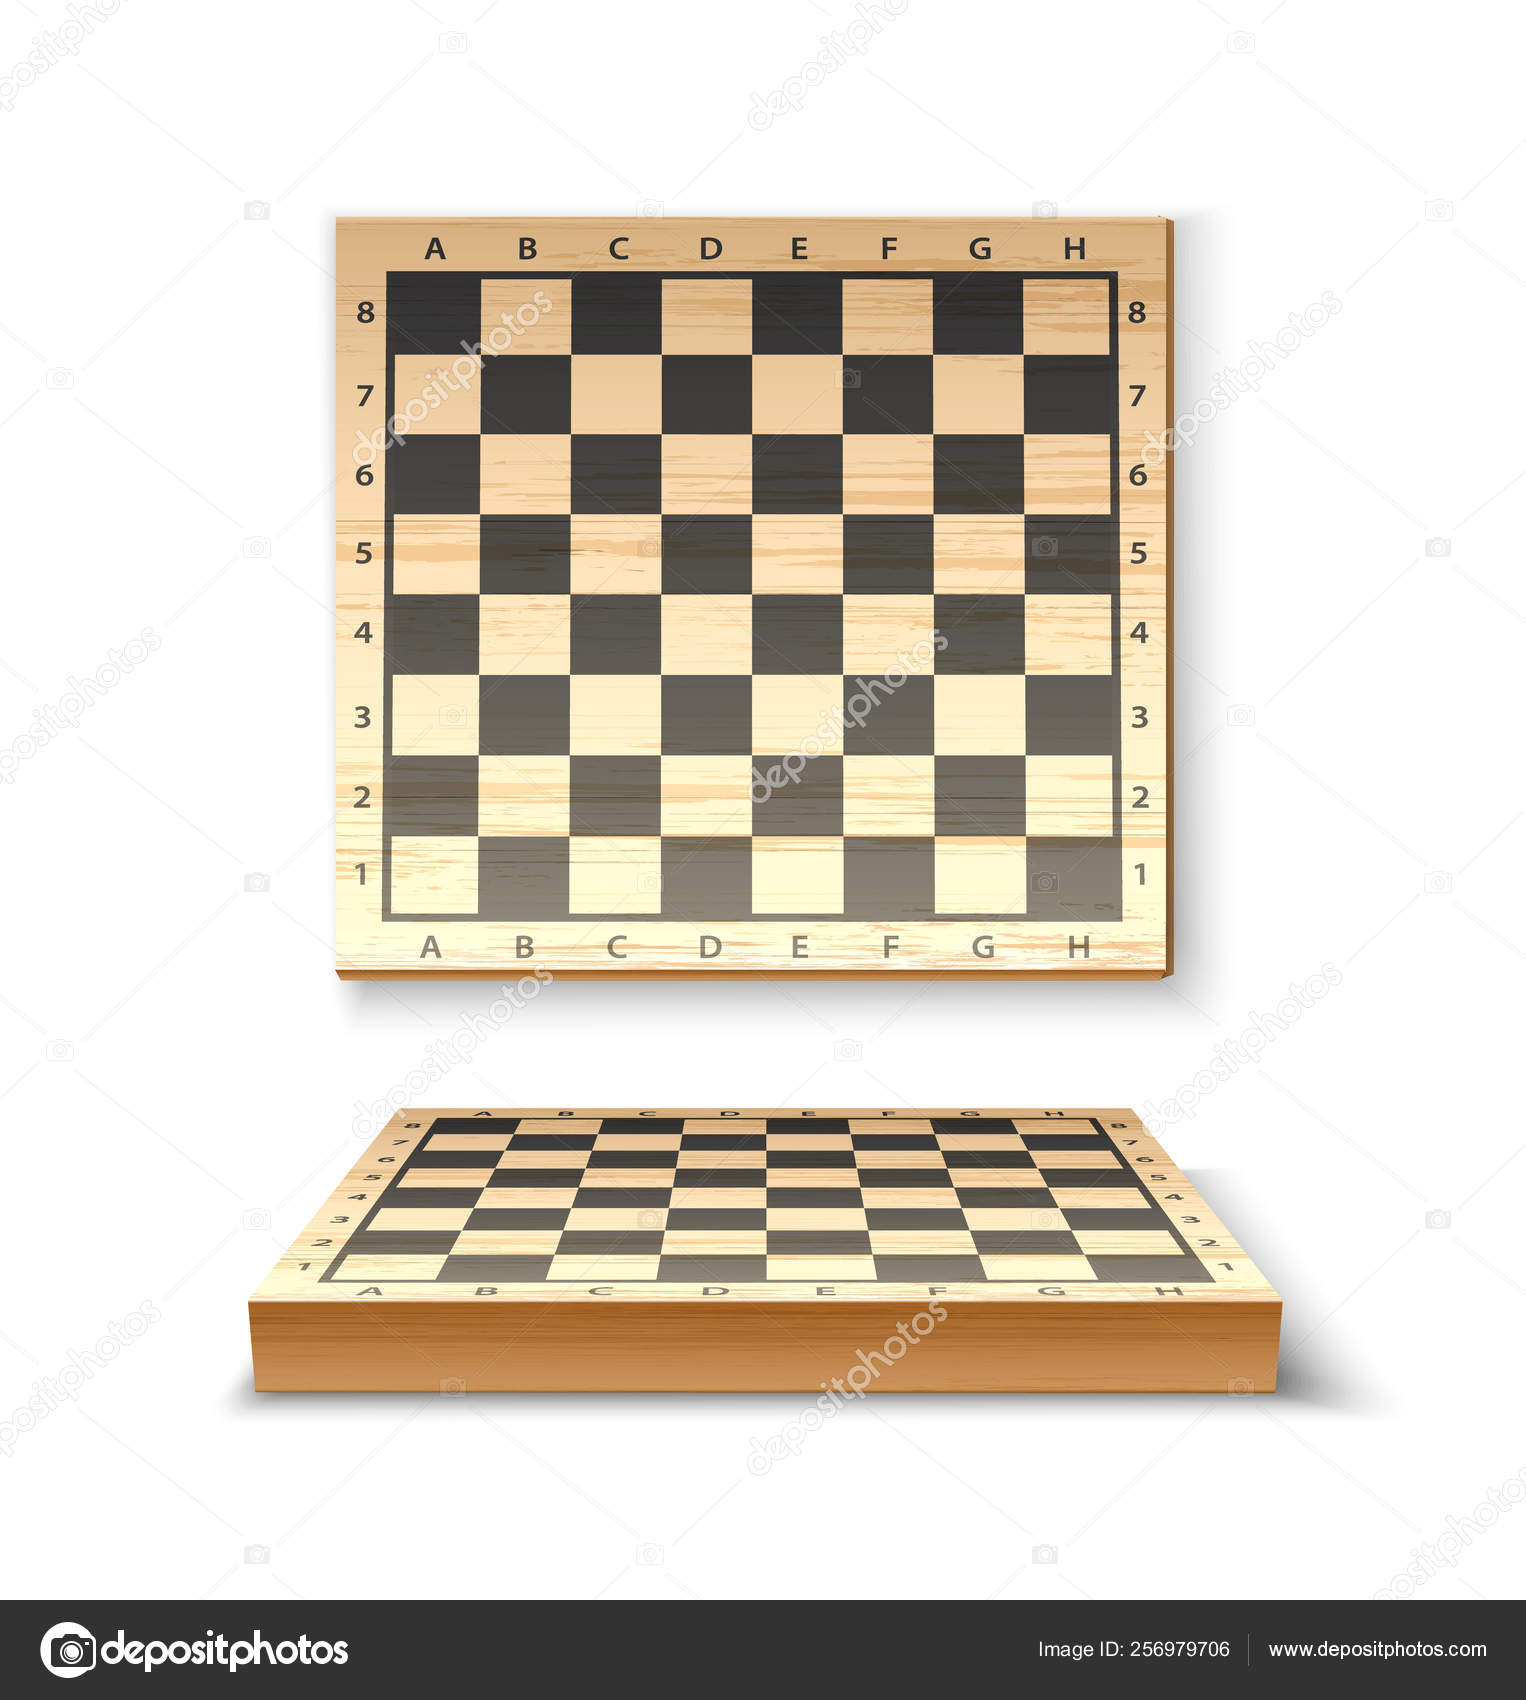 Chess Pro 3D - Play Game for Free - GameTop